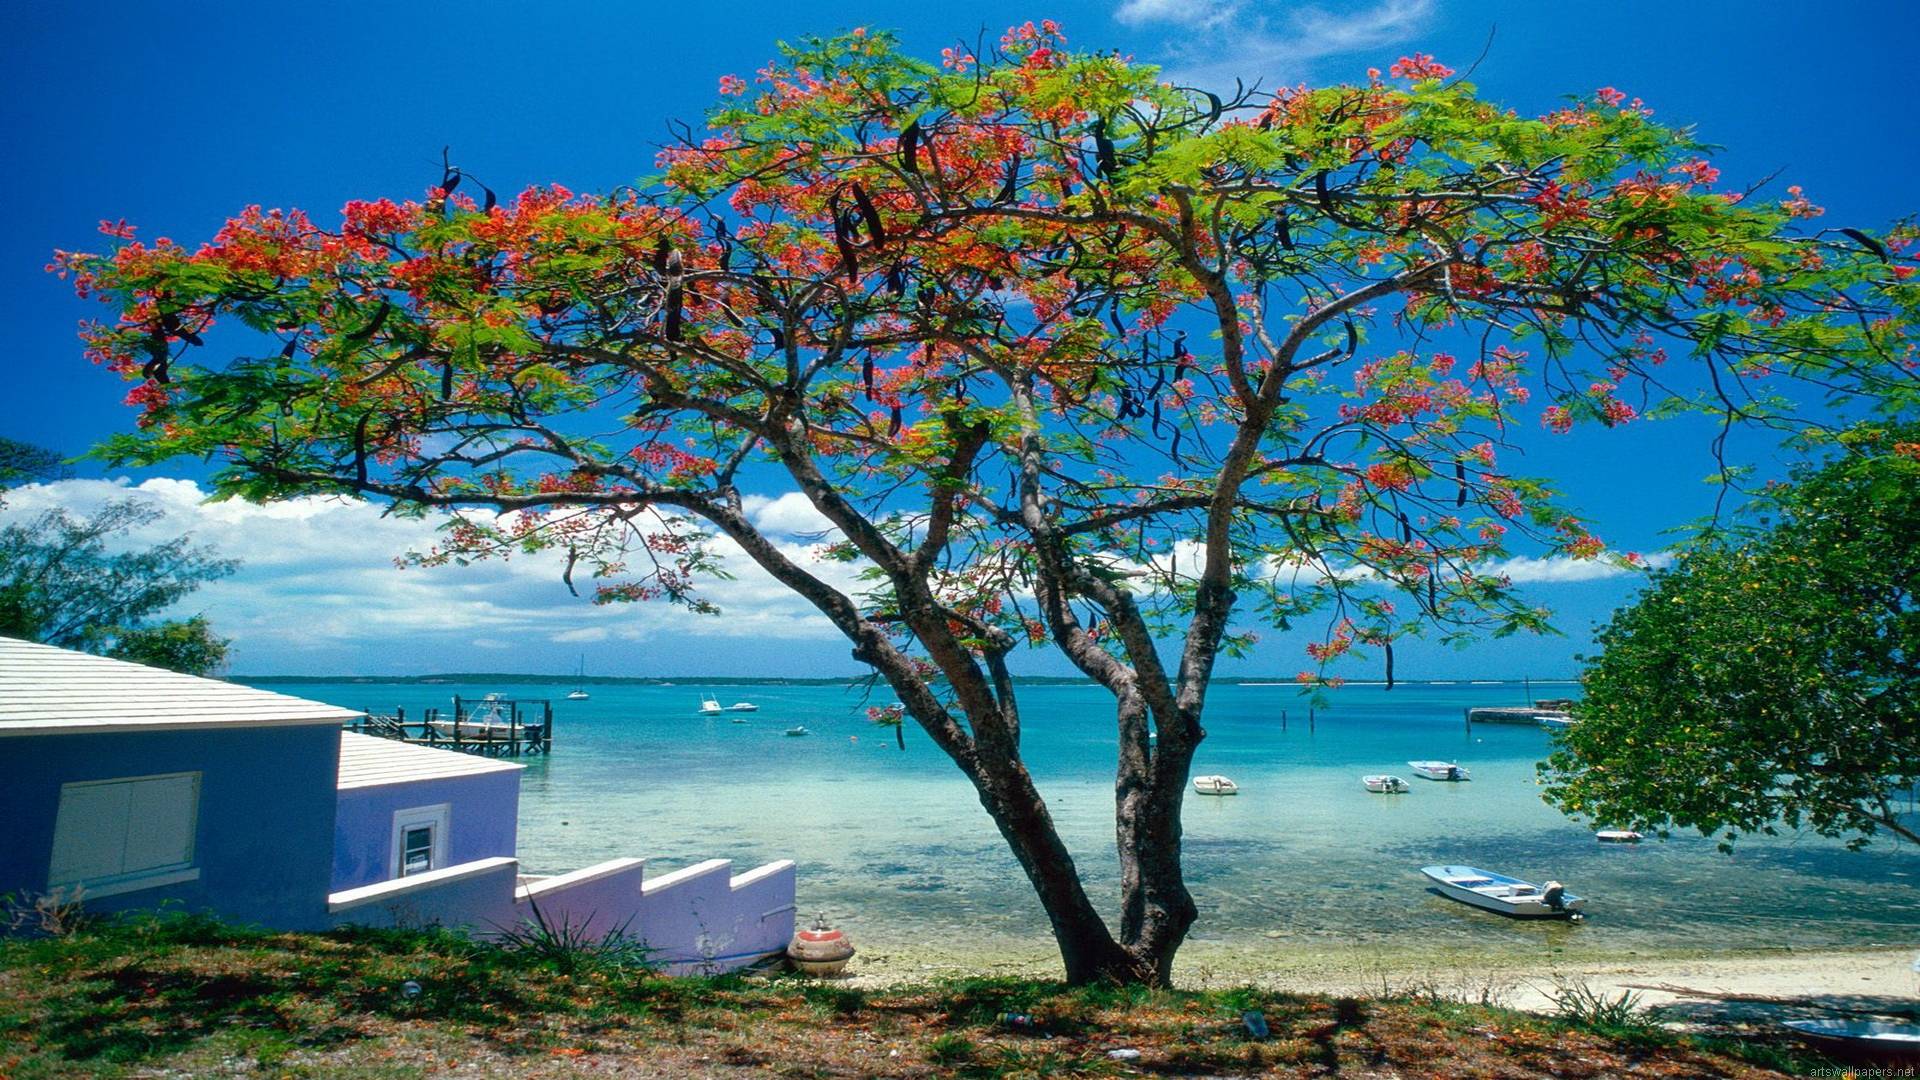 HD Blooming Tree On A Caribbean Beach Wallpaper. Download Free